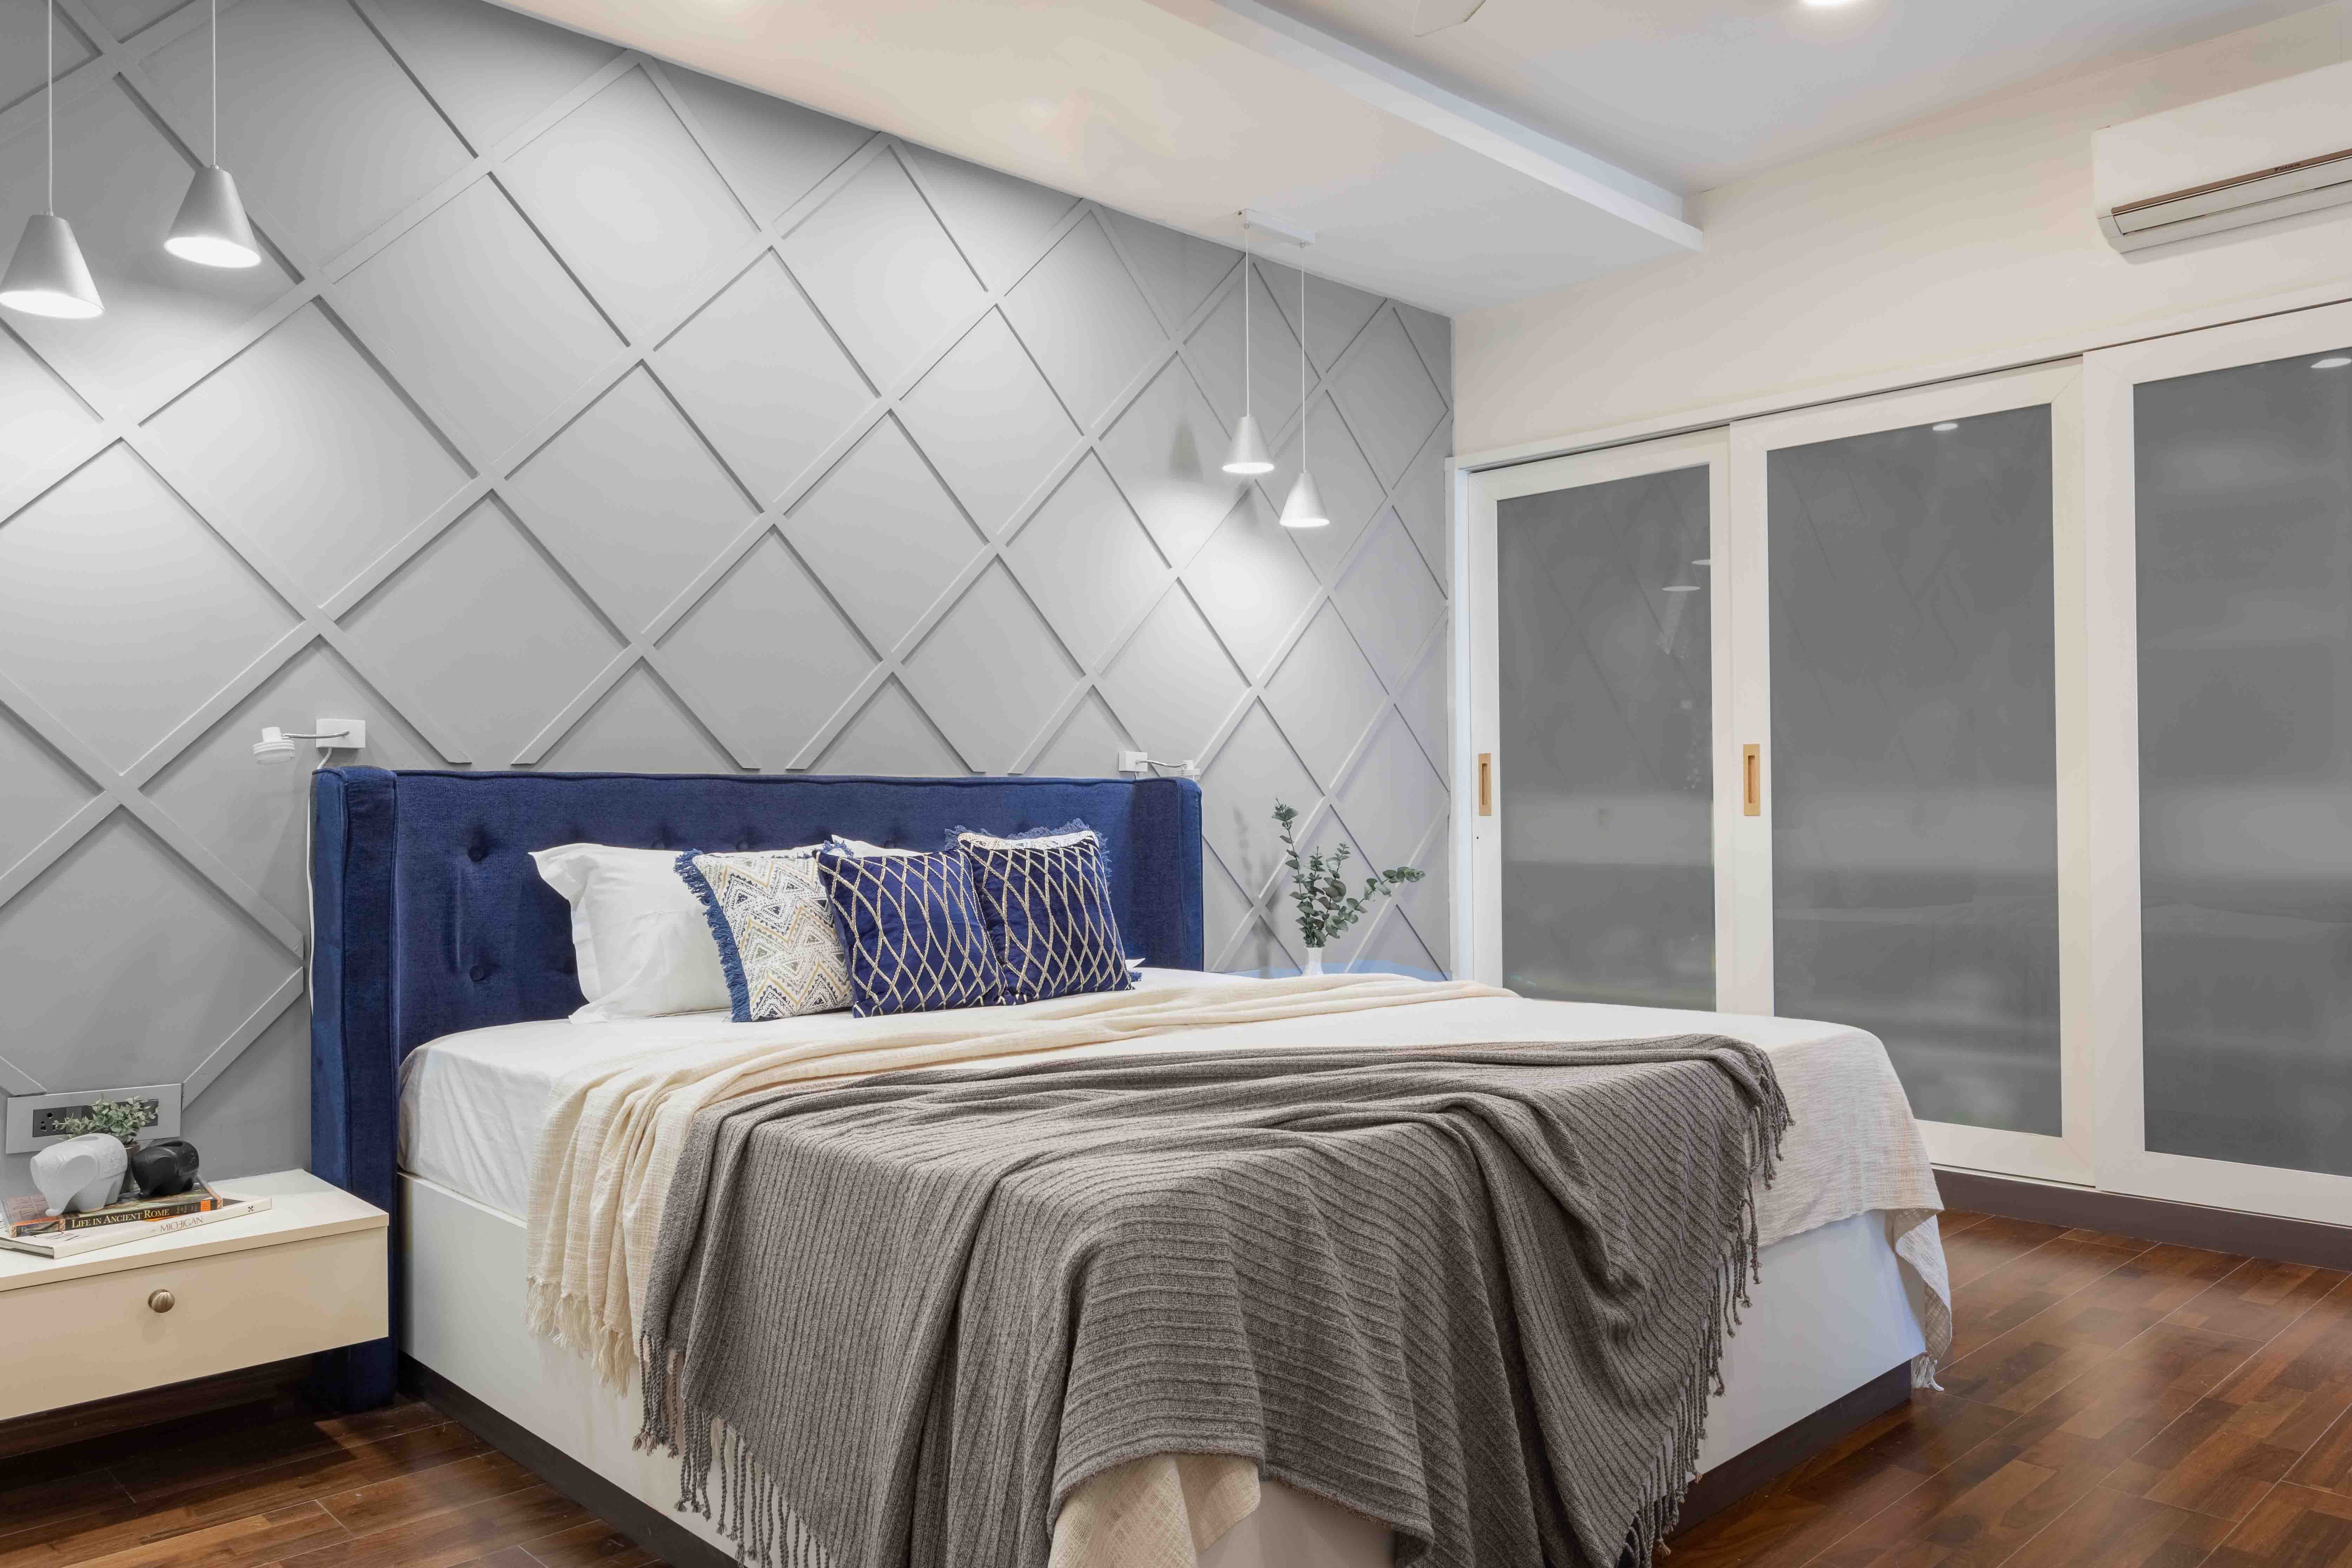 Contemporary Mumbai 2-BHK Flat Design With Grey And Blue Master Bedroom